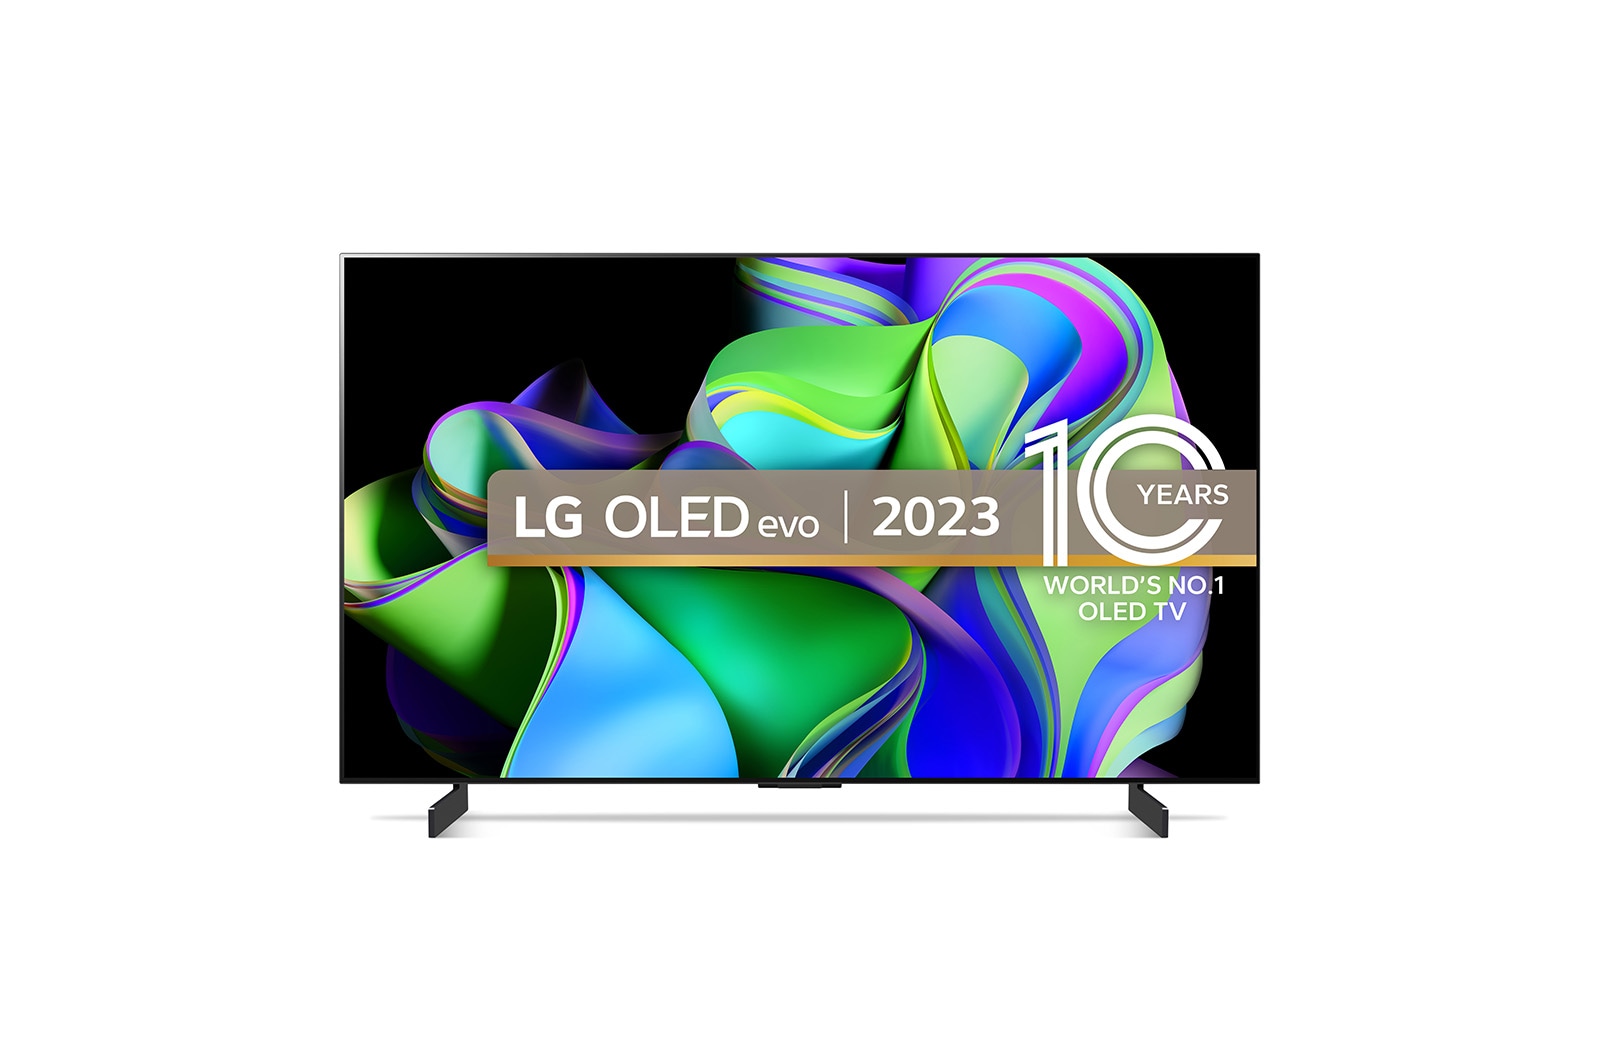 How To Privacy Settings LG OLED TV